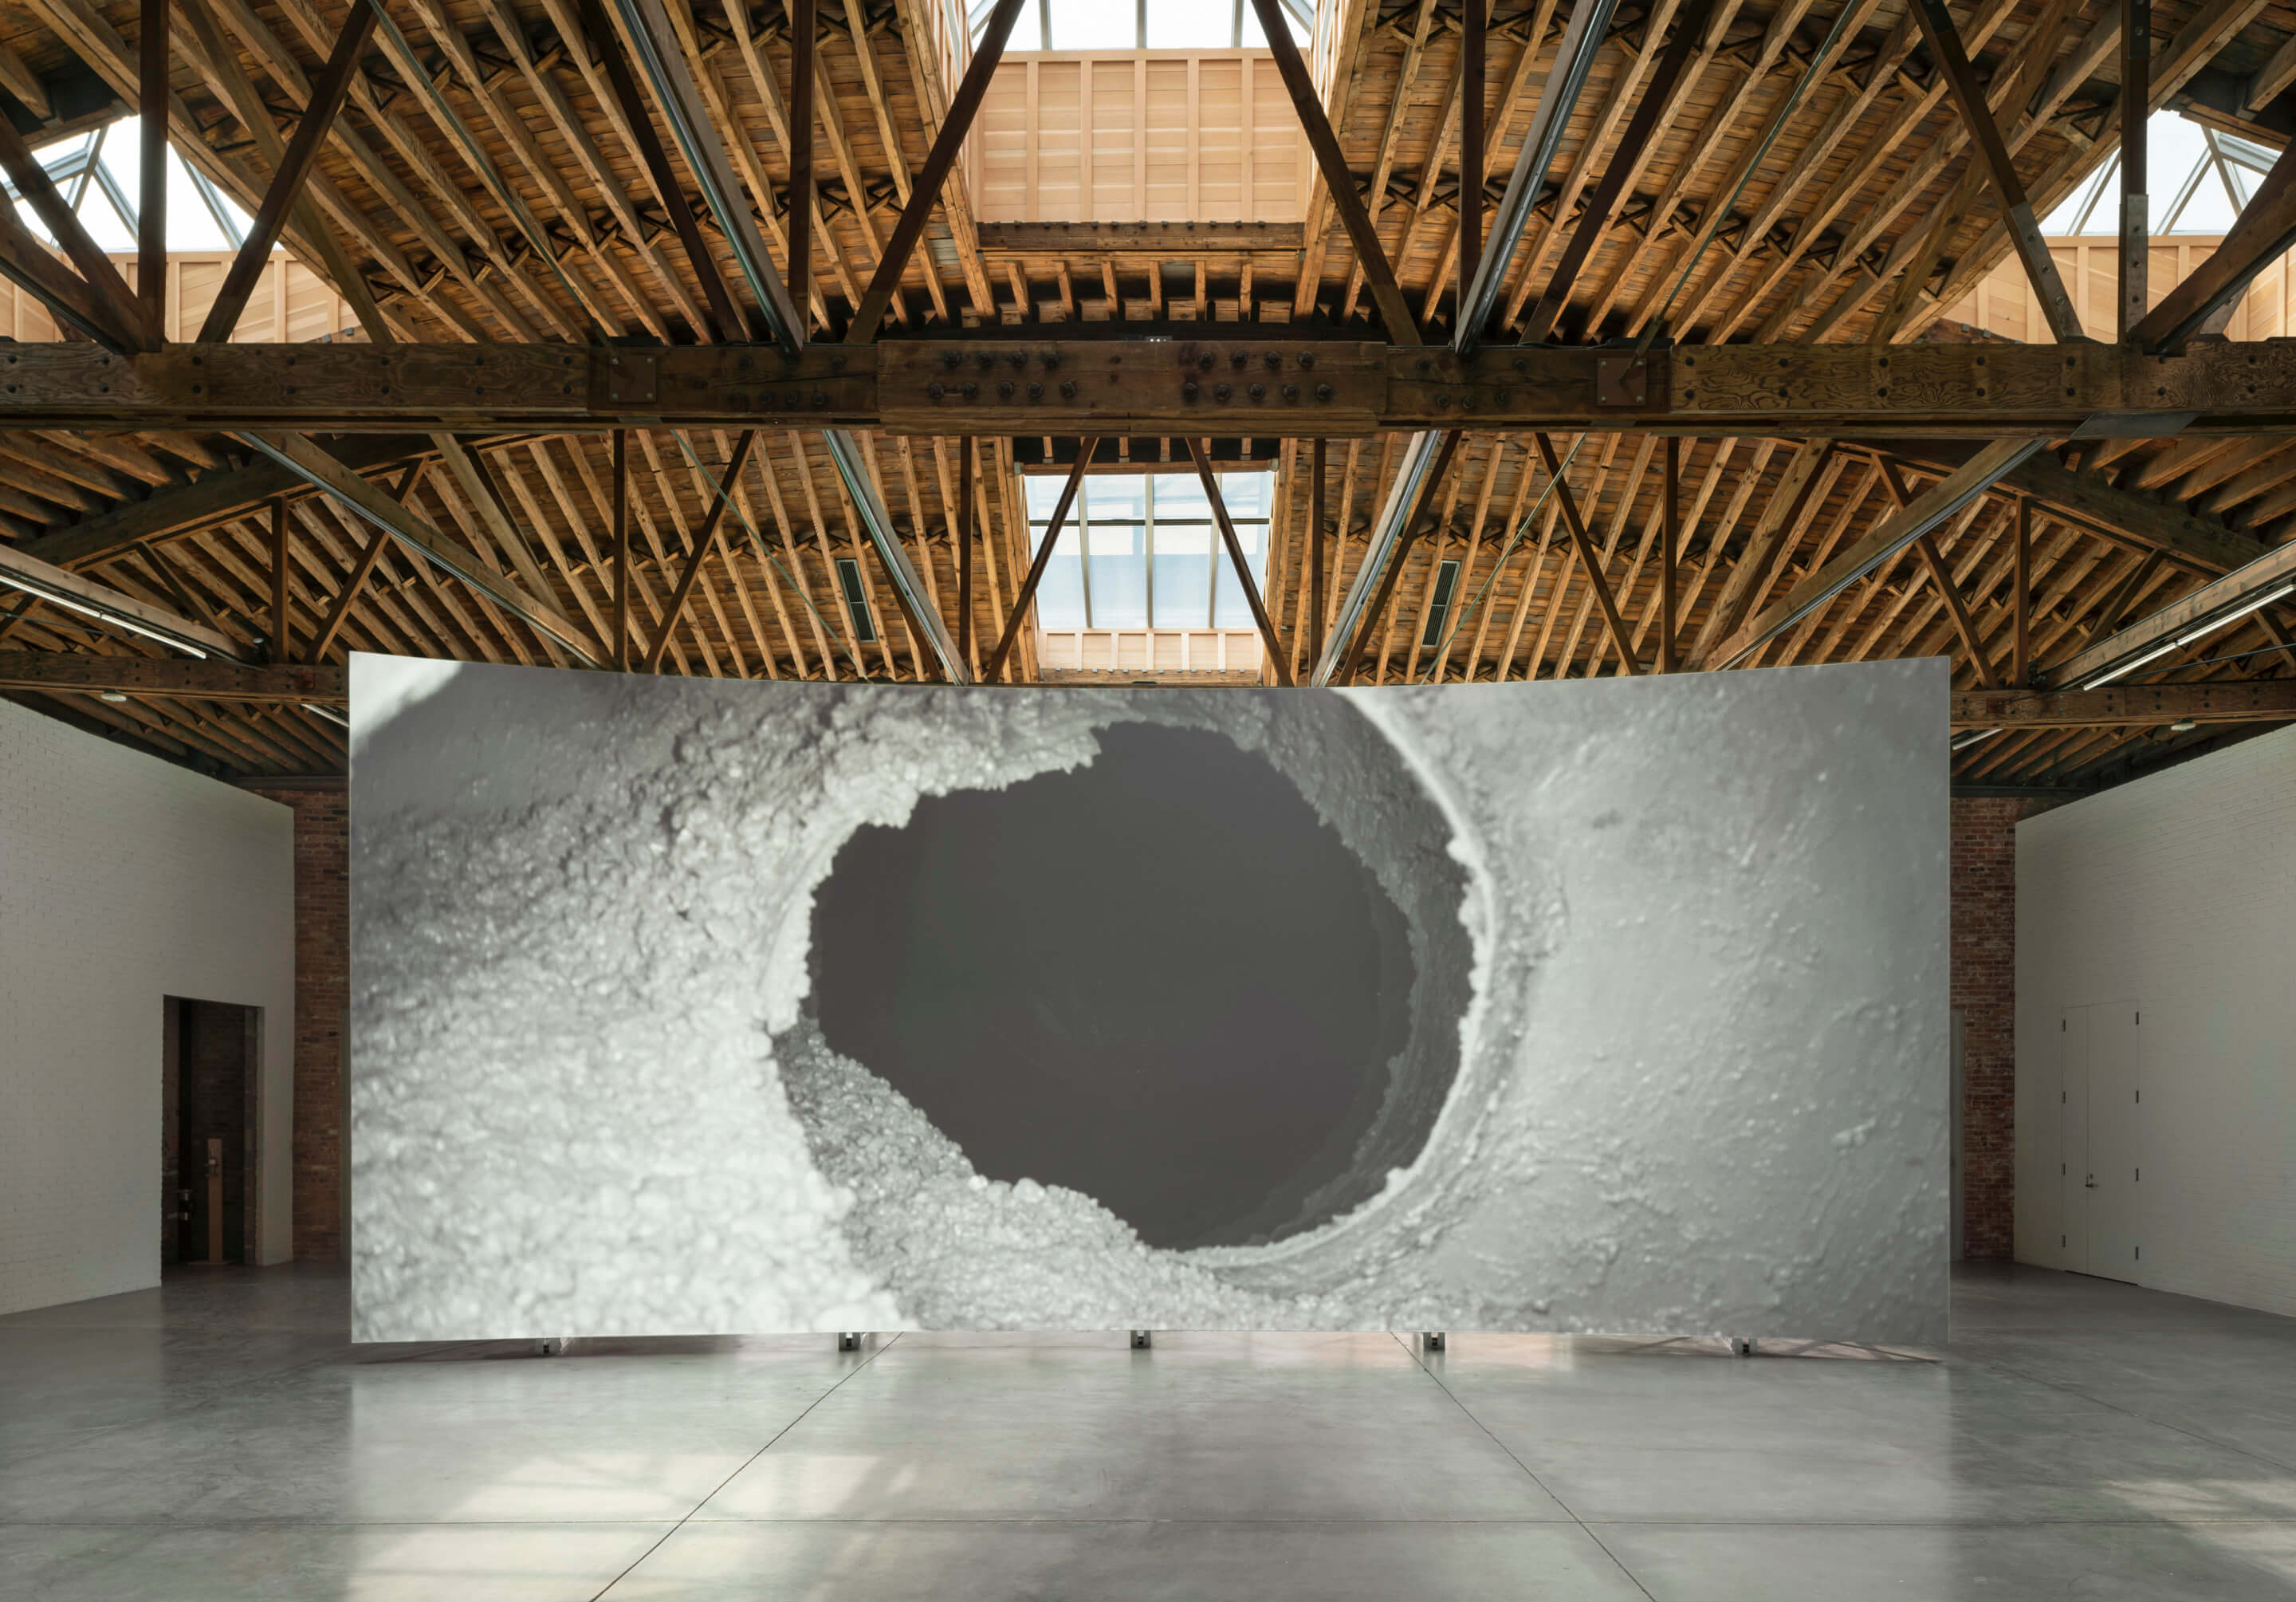 installation view of a major art work beneath a vaulted timber ceiling